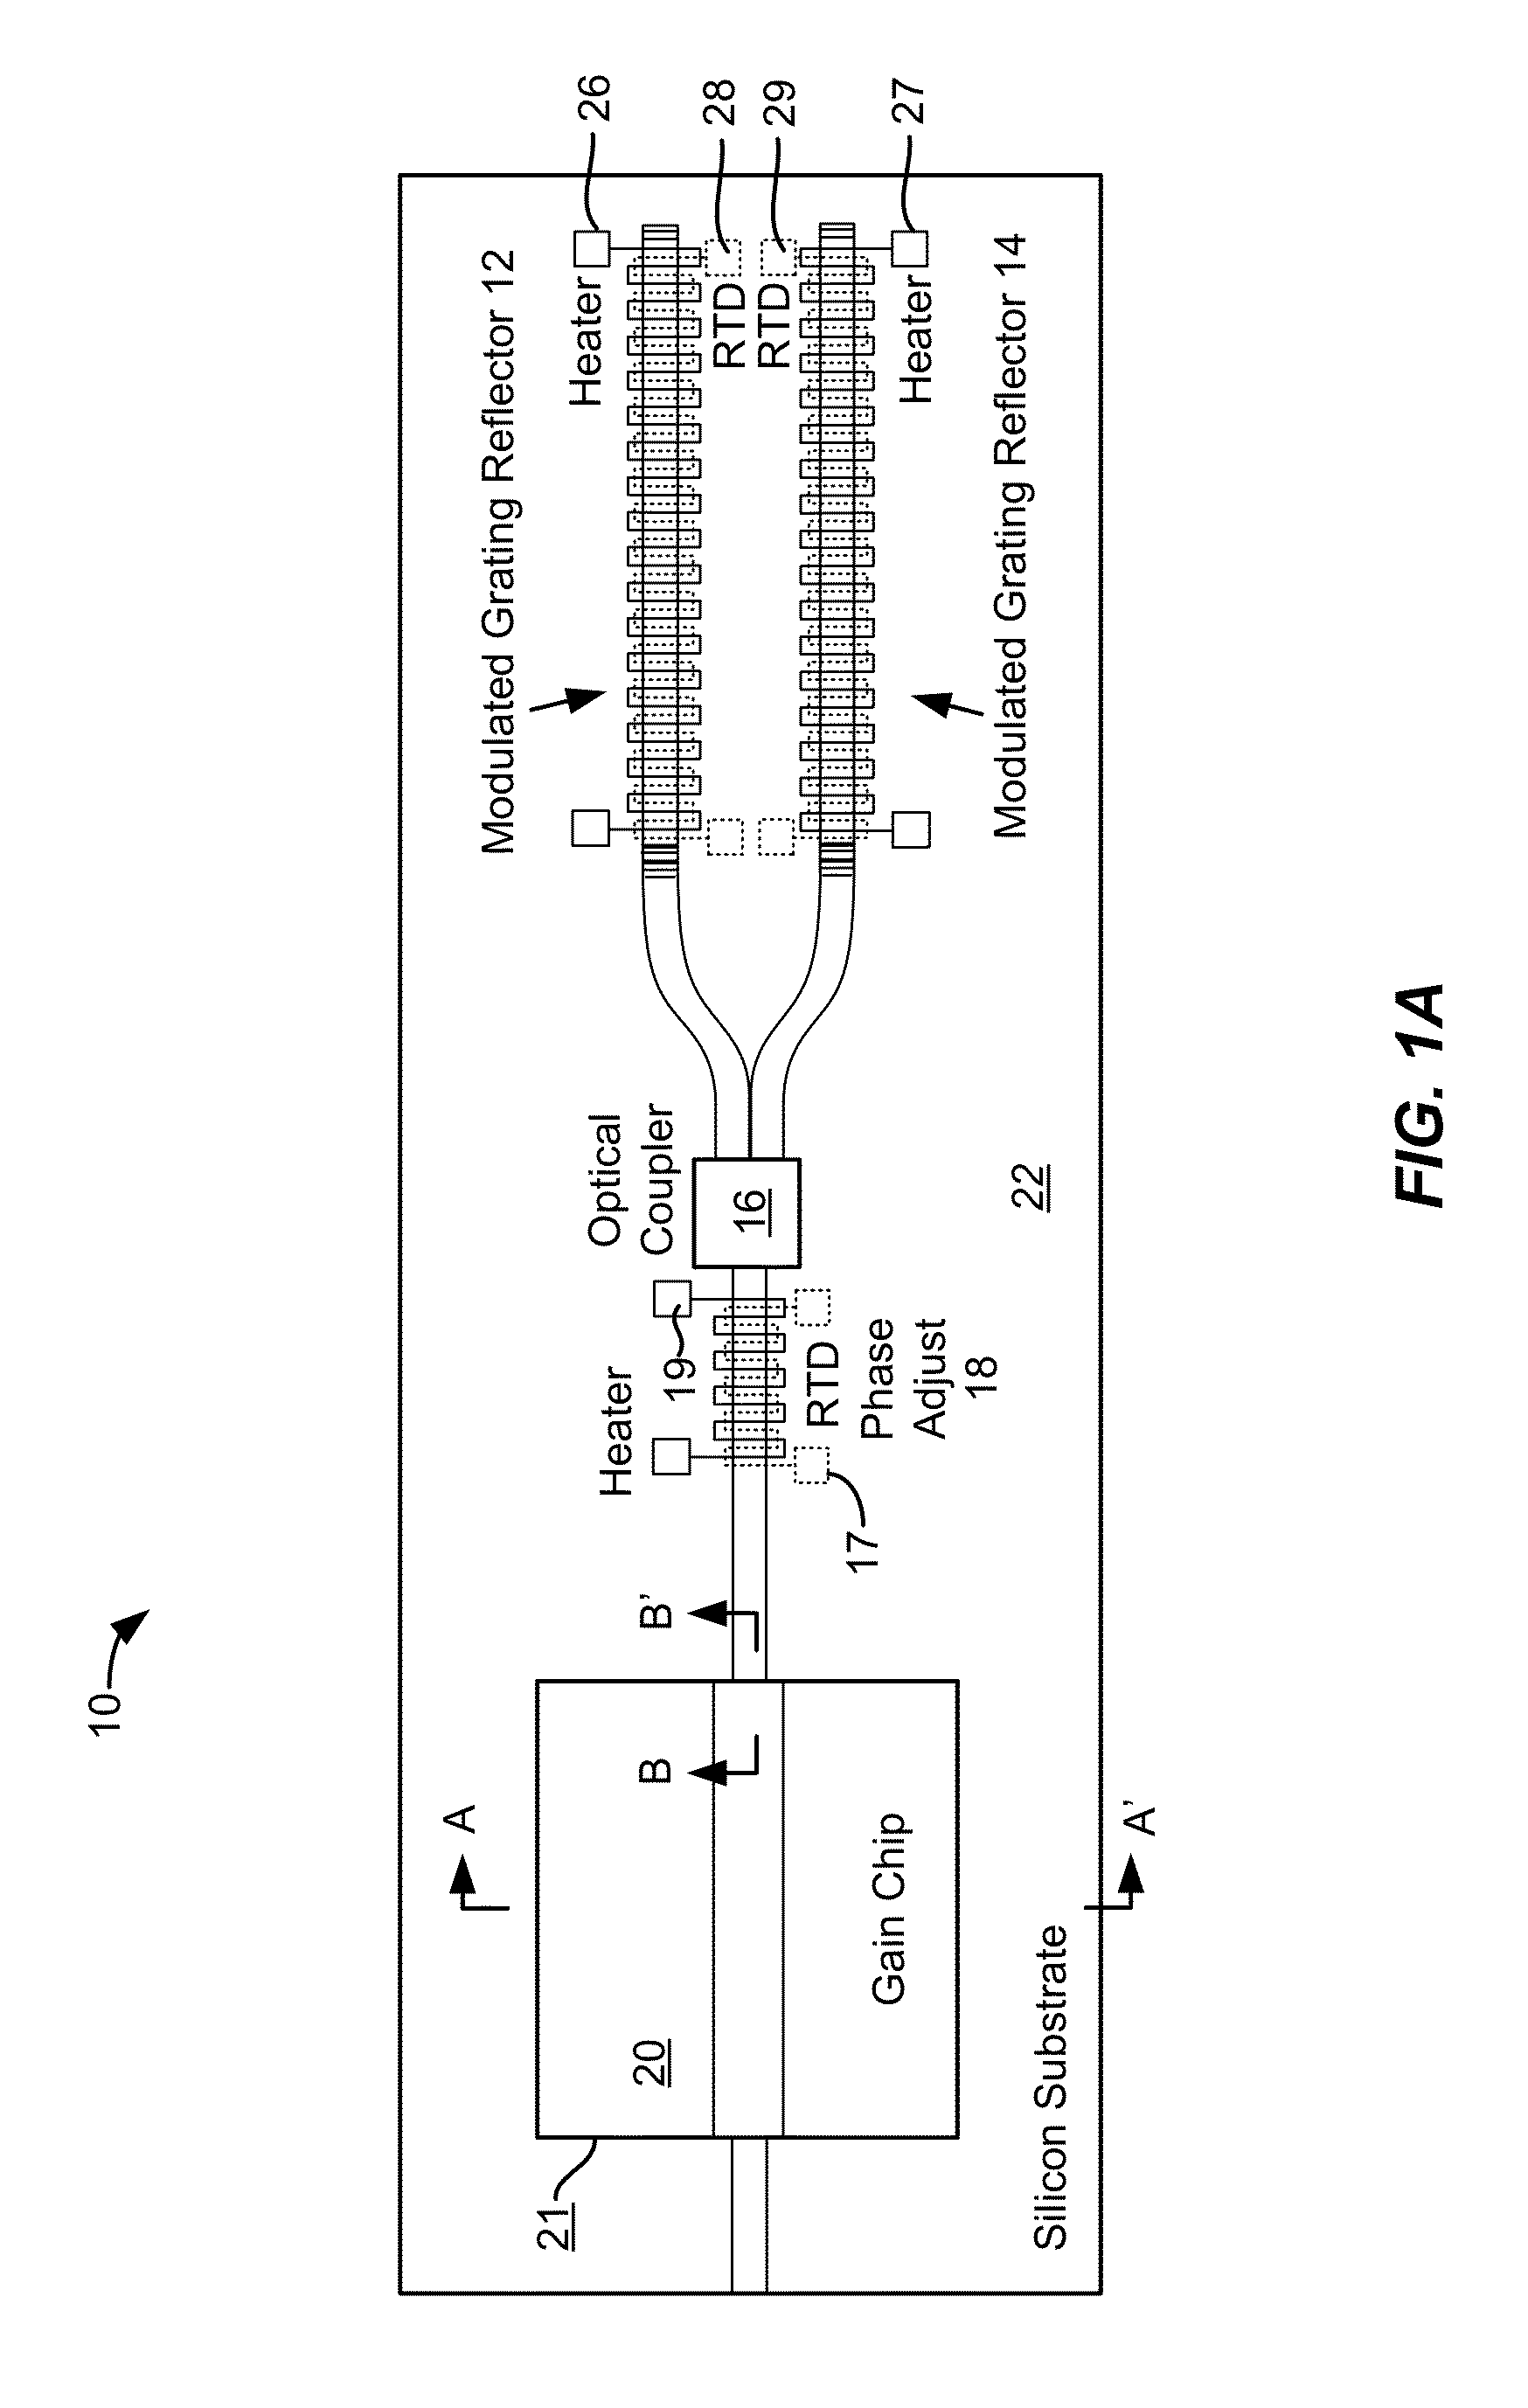 Tunable hybrid laser with carrier-induced phase control